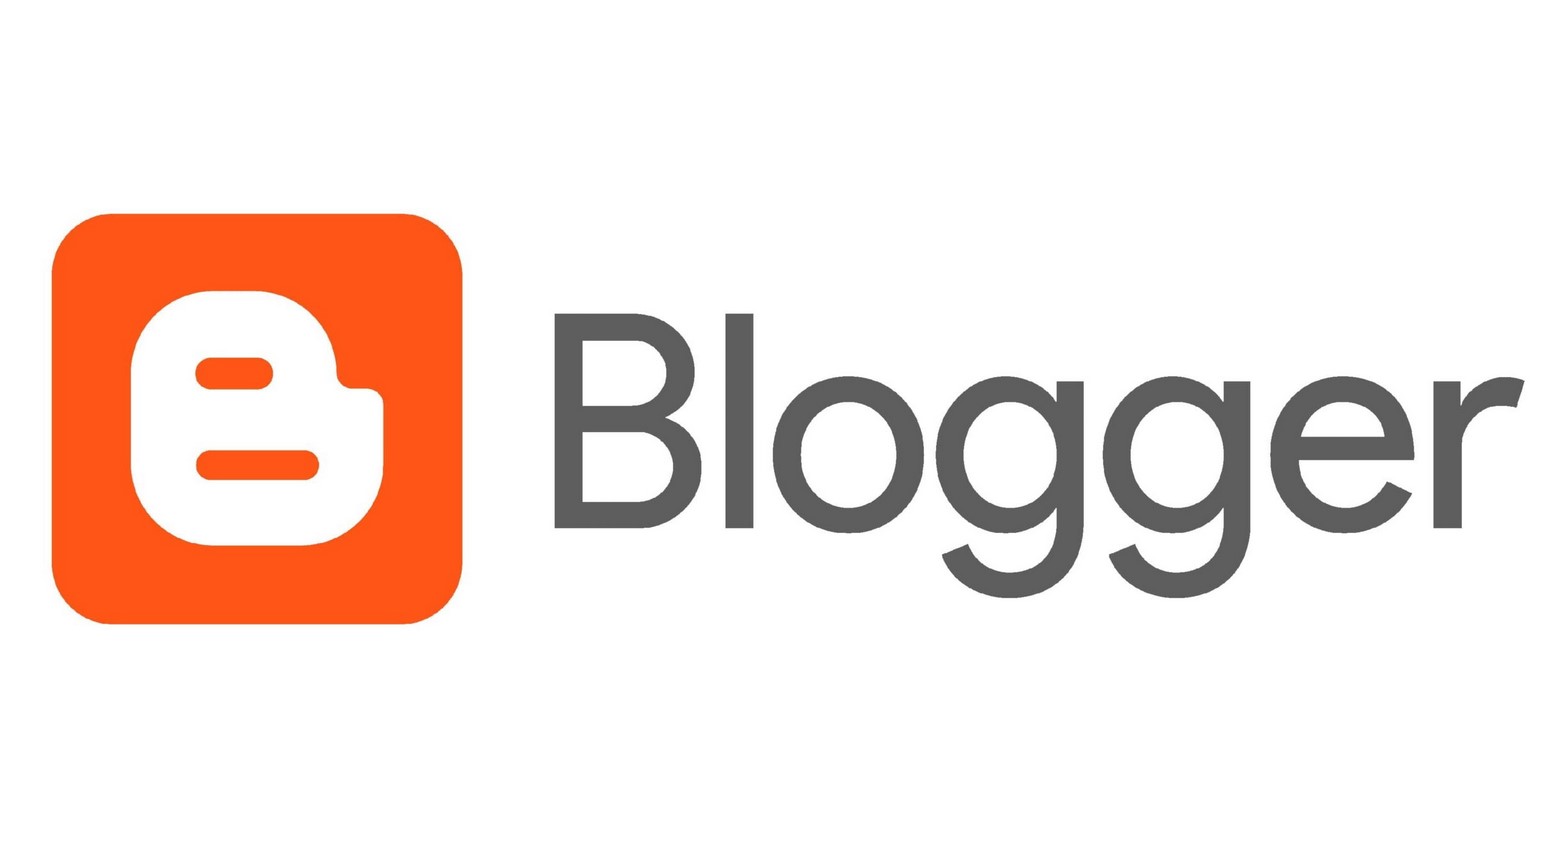 Blogger Tips and Tricks: Expert Advice to Improve Your Blogging Game